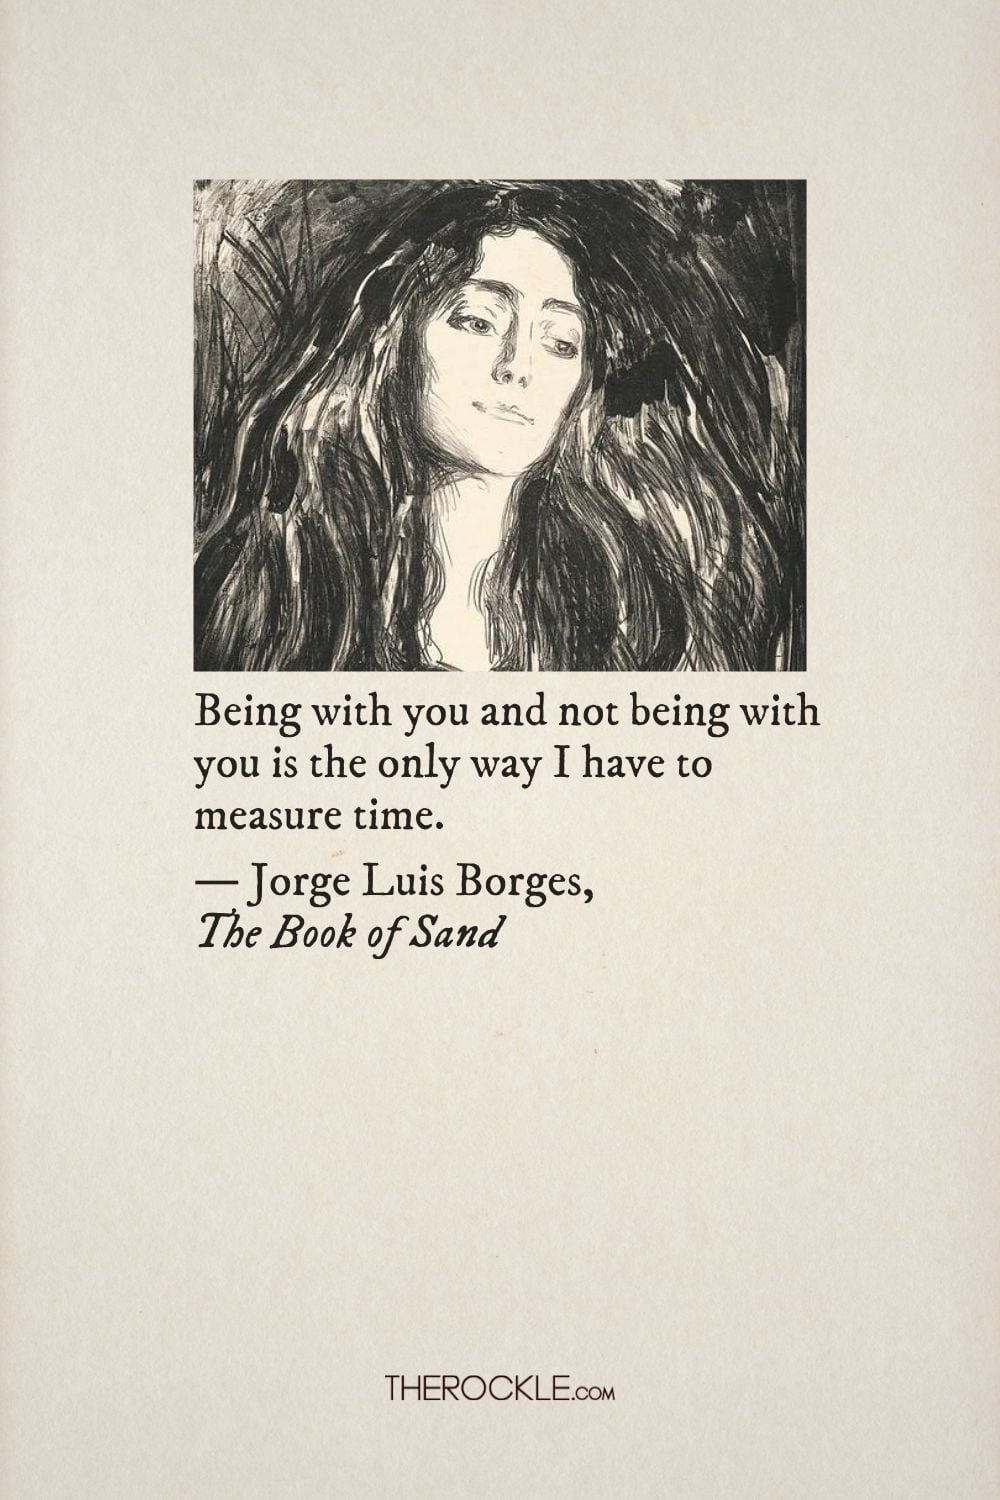 Borges quote on love and time